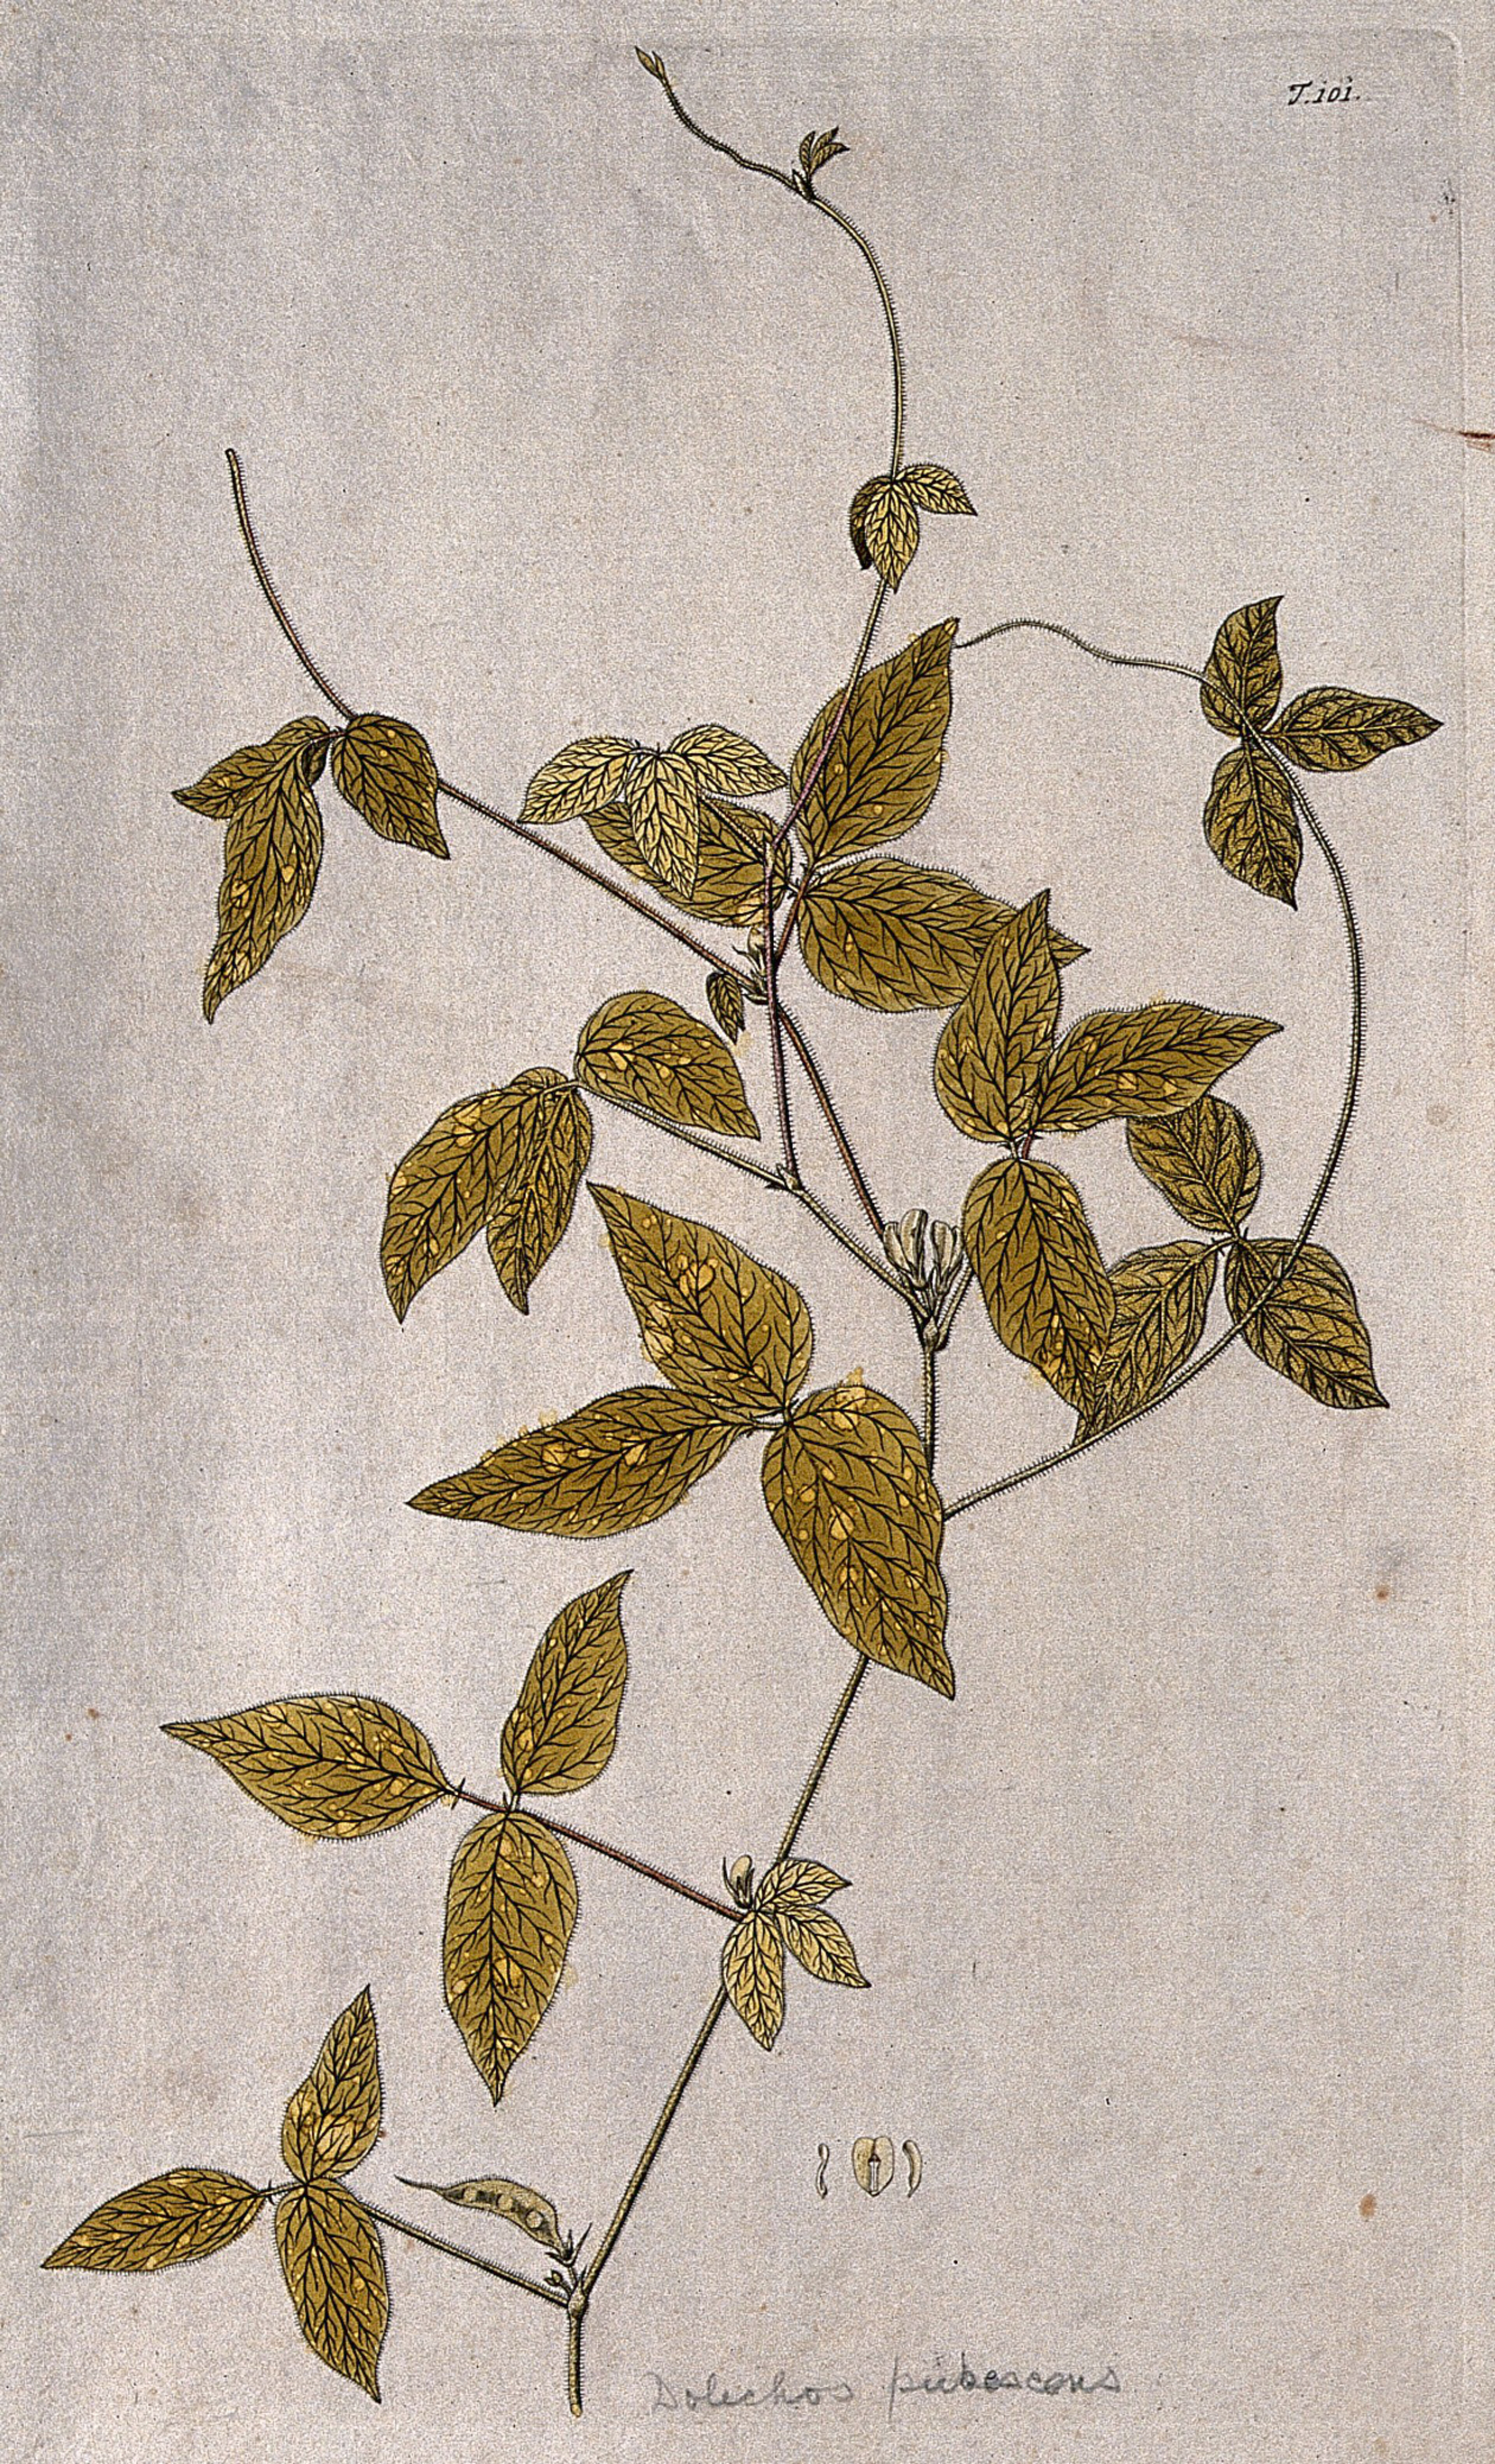 Dolichos pubescens: flowering and fruiting stem with separate floral segments. Coloured engraving after F. von Scheidl, 1772.